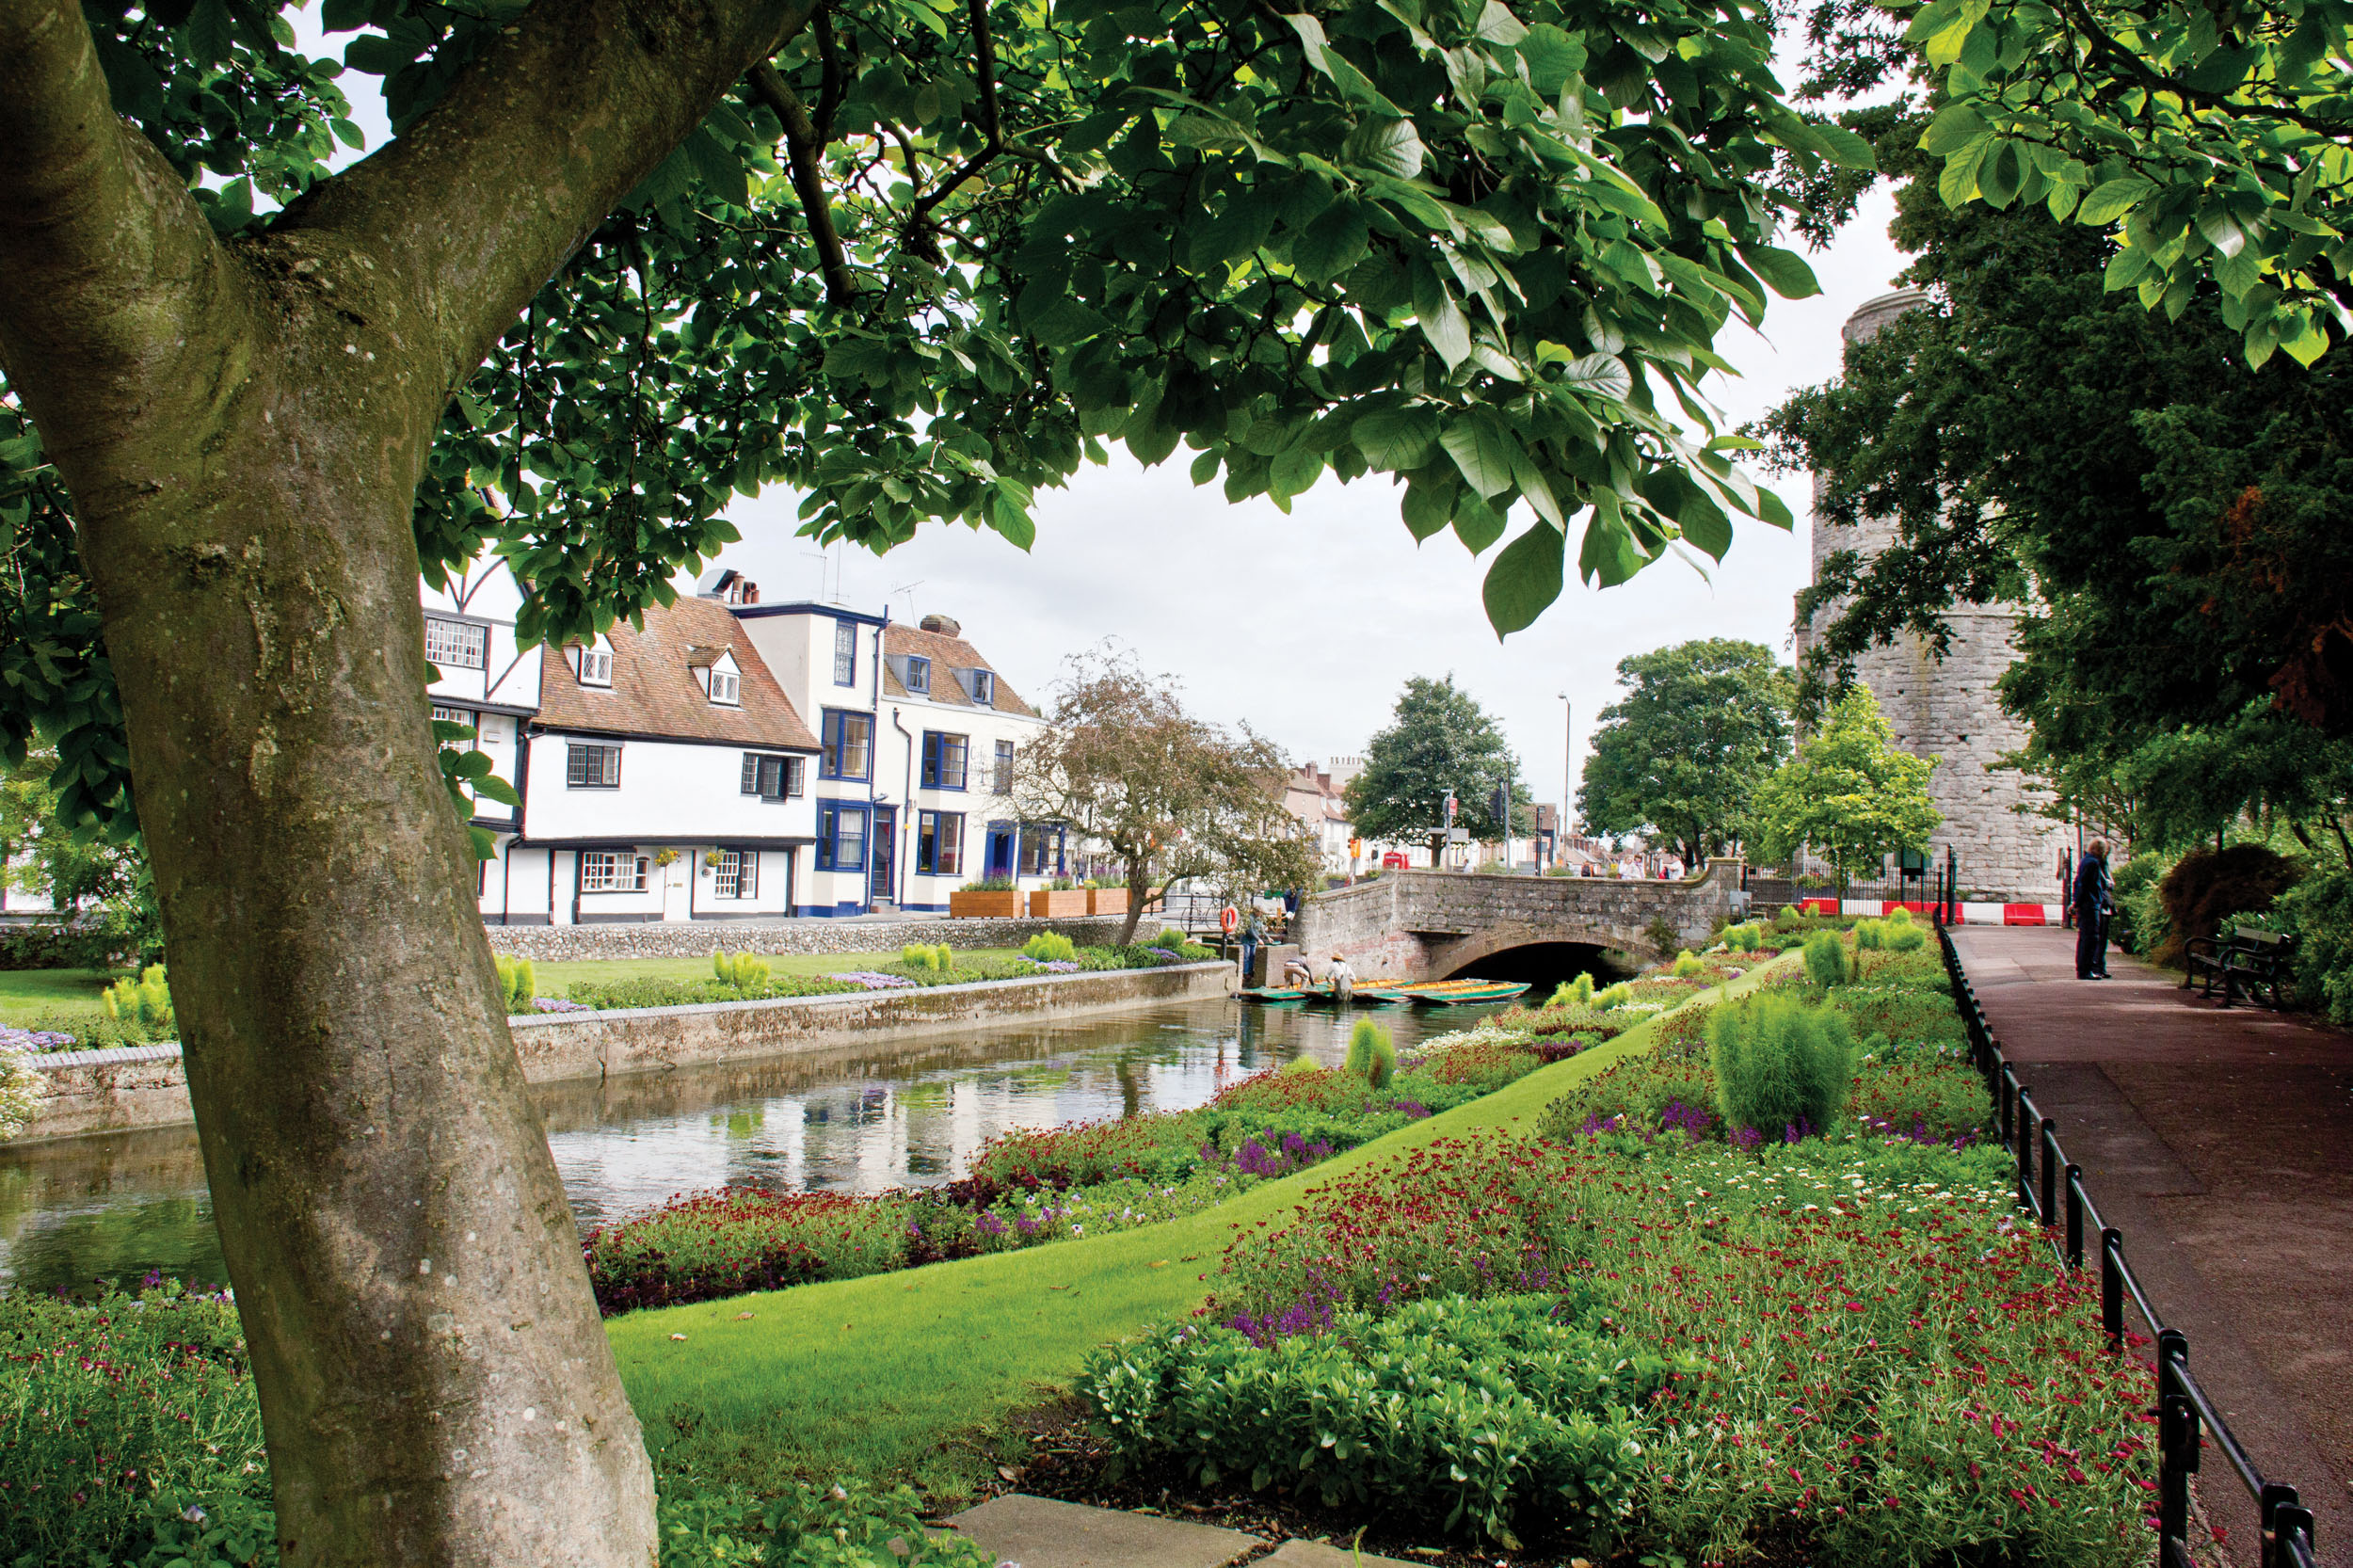 The River Stour in Canterbury